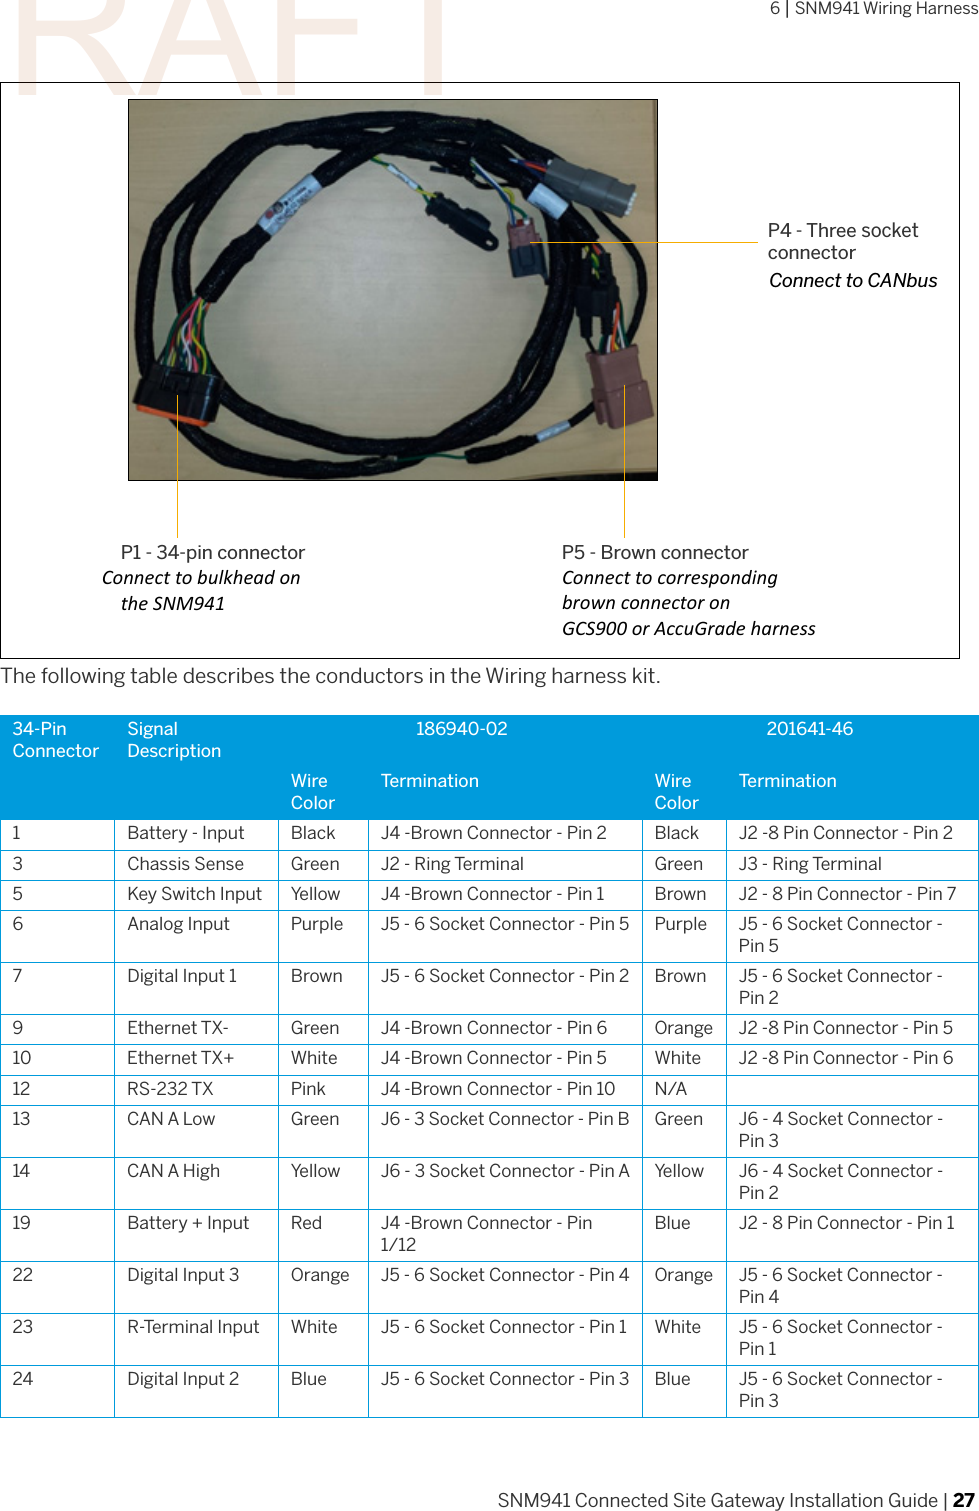 6 | SNM941 Wiring HarnessSNM941 Connected Site Gateway Installation Guide | 27The following table describes the conductors in the Wiring harness kit.34-Pin ConnectorSignal Description 186940-02 201641-46Wire Color Te r m i n a t io n Wire Color Te r m i n a t i o n1Battery - Input Black J4 -Brown Connector - Pin 2 Black J2 -8 Pin Connector - Pin 23Chassis Sense Green J2 - Ring Terminal Green J3 - Ring Terminal5Key Switch Input Yellow J4 -Brown Connector - Pin 1 Brown J2 - 8 Pin Connector - Pin 76Analog Input Purple J5 - 6 Socket Connector - Pin 5 Purple J5 - 6 Socket Connector - Pin 57Digital Input 1 Brown J5 - 6 Socket Connector - Pin 2 Brown J5 - 6 Socket Connector - Pin 29Ethernet TX- Green J4 -Brown Connector - Pin 6 Orange J2 -8 Pin Connector - Pin 510 Ethernet TX+ White J4 -Brown Connector - Pin 5 White J2 -8 Pin Connector - Pin 612 RS-232 TX Pink J4 -Brown Connector - Pin 10 N/A13 CAN A Low Green J6 - 3 Socket Connector - Pin B Green J6 - 4 Socket Connector - Pin 314 CAN A High Yellow J6 - 3 Socket Connector - Pin A Yellow J6 - 4 Socket Connector - Pin 219 Battery + Input Red J4 -Brown Connector - Pin 1/12Blue J2 - 8 Pin Connector - Pin 122 Digital Input 3 Orange J5 - 6 Socket Connector - Pin 4 Orange J5 - 6 Socket Connector - Pin 423 R-Terminal Input White J5 - 6 Socket Connector - Pin 1 White J5 - 6 Socket Connector - Pin 124 Digital Input 2 Blue J5 - 6 Socket Connector - Pin 3 Blue J5 - 6 Socket Connector - Pin 3P1 - 34-pin connector  P5 - Brown connectorP4 - Three socket connectorConnect to bulkhead onthe SNM941Connect to CANbusConnect to correspondingbrown connector onGCS900 or AccuGrade harness DRAFT